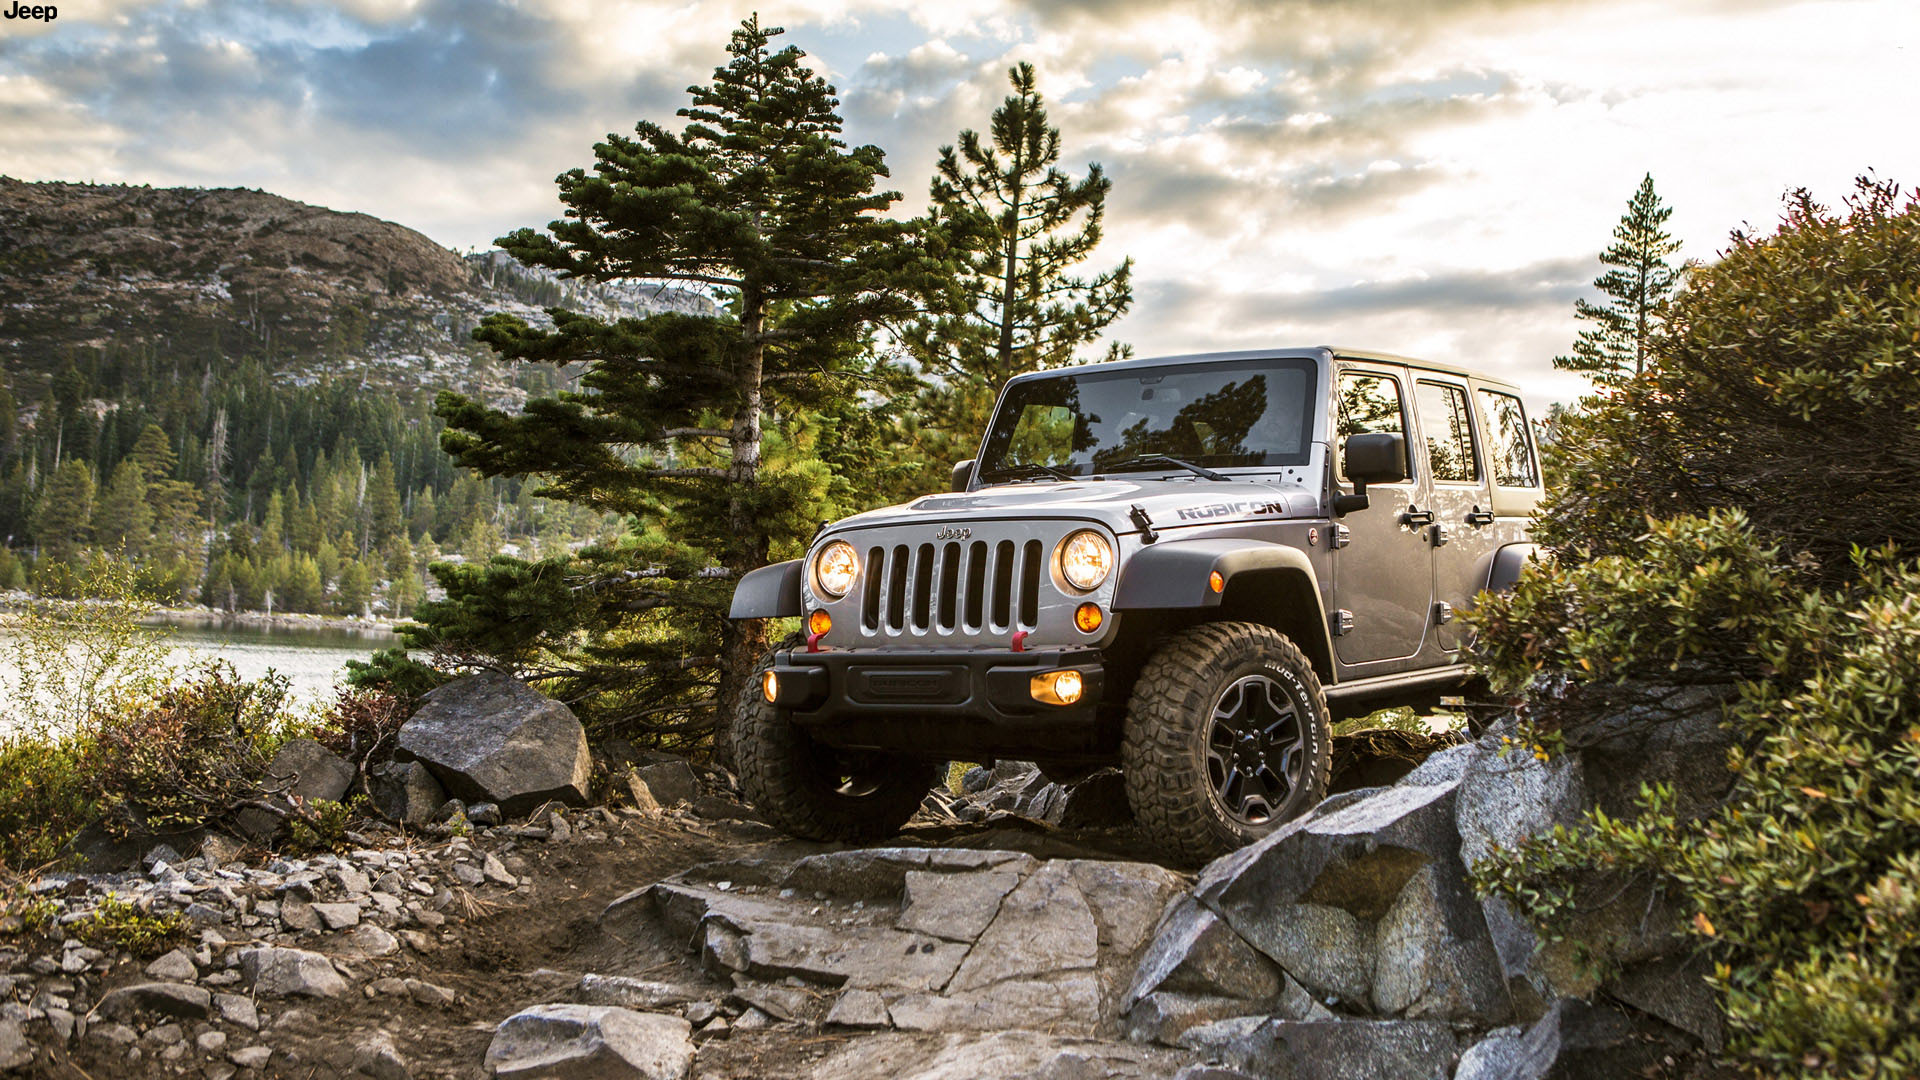 Jeep HD Wallpaper With Resolutions Pixel